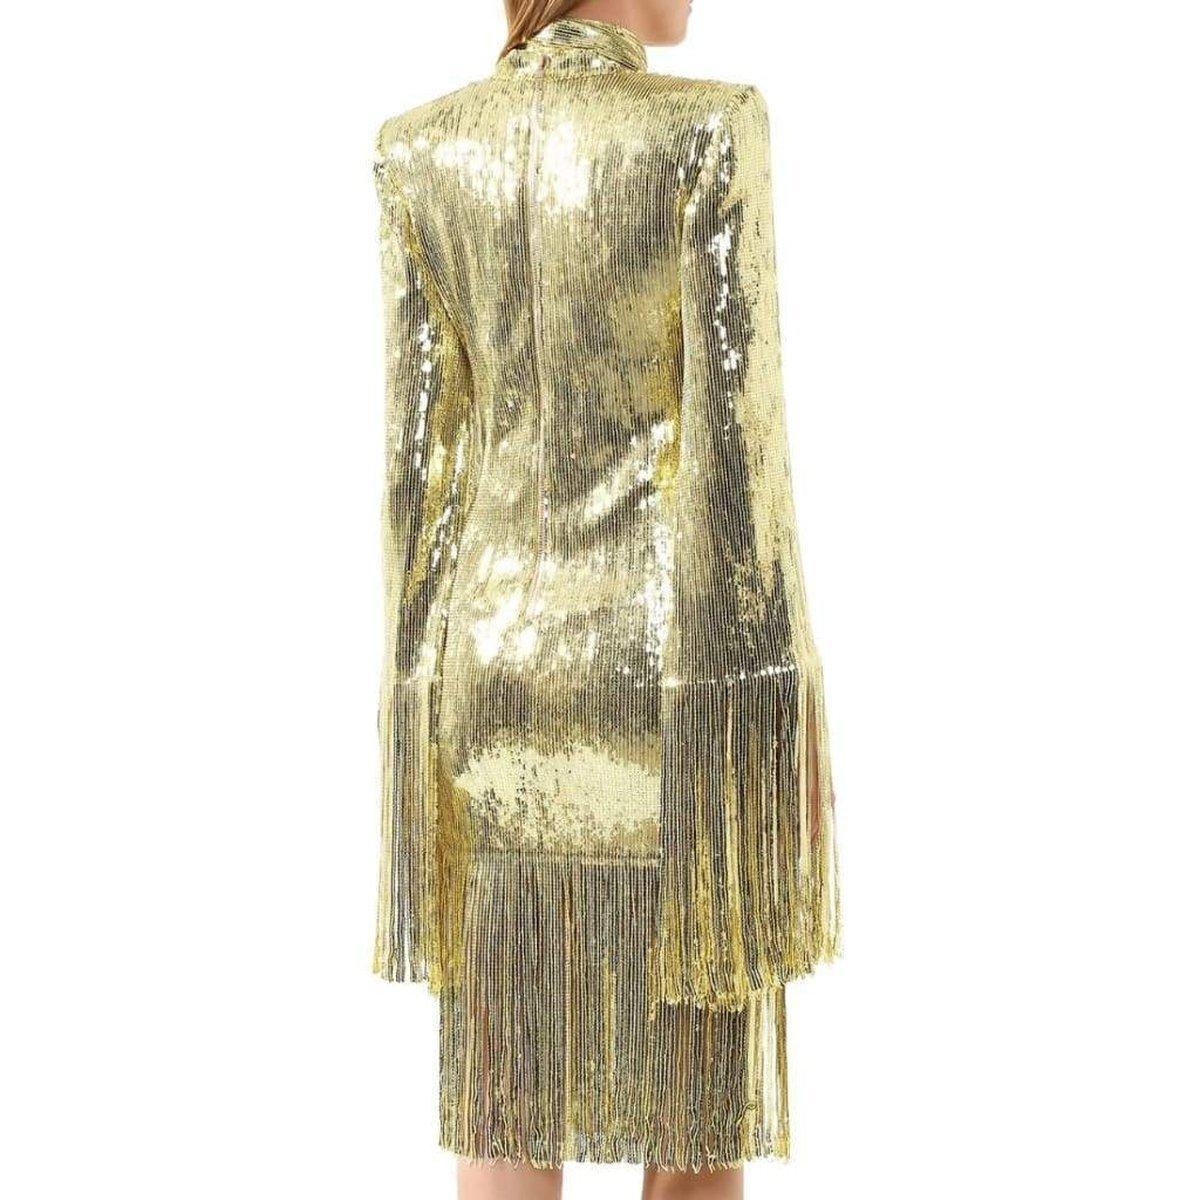 Balmain Fringed Gold Sequined Mini Dress In New Condition For Sale In Brossard, QC